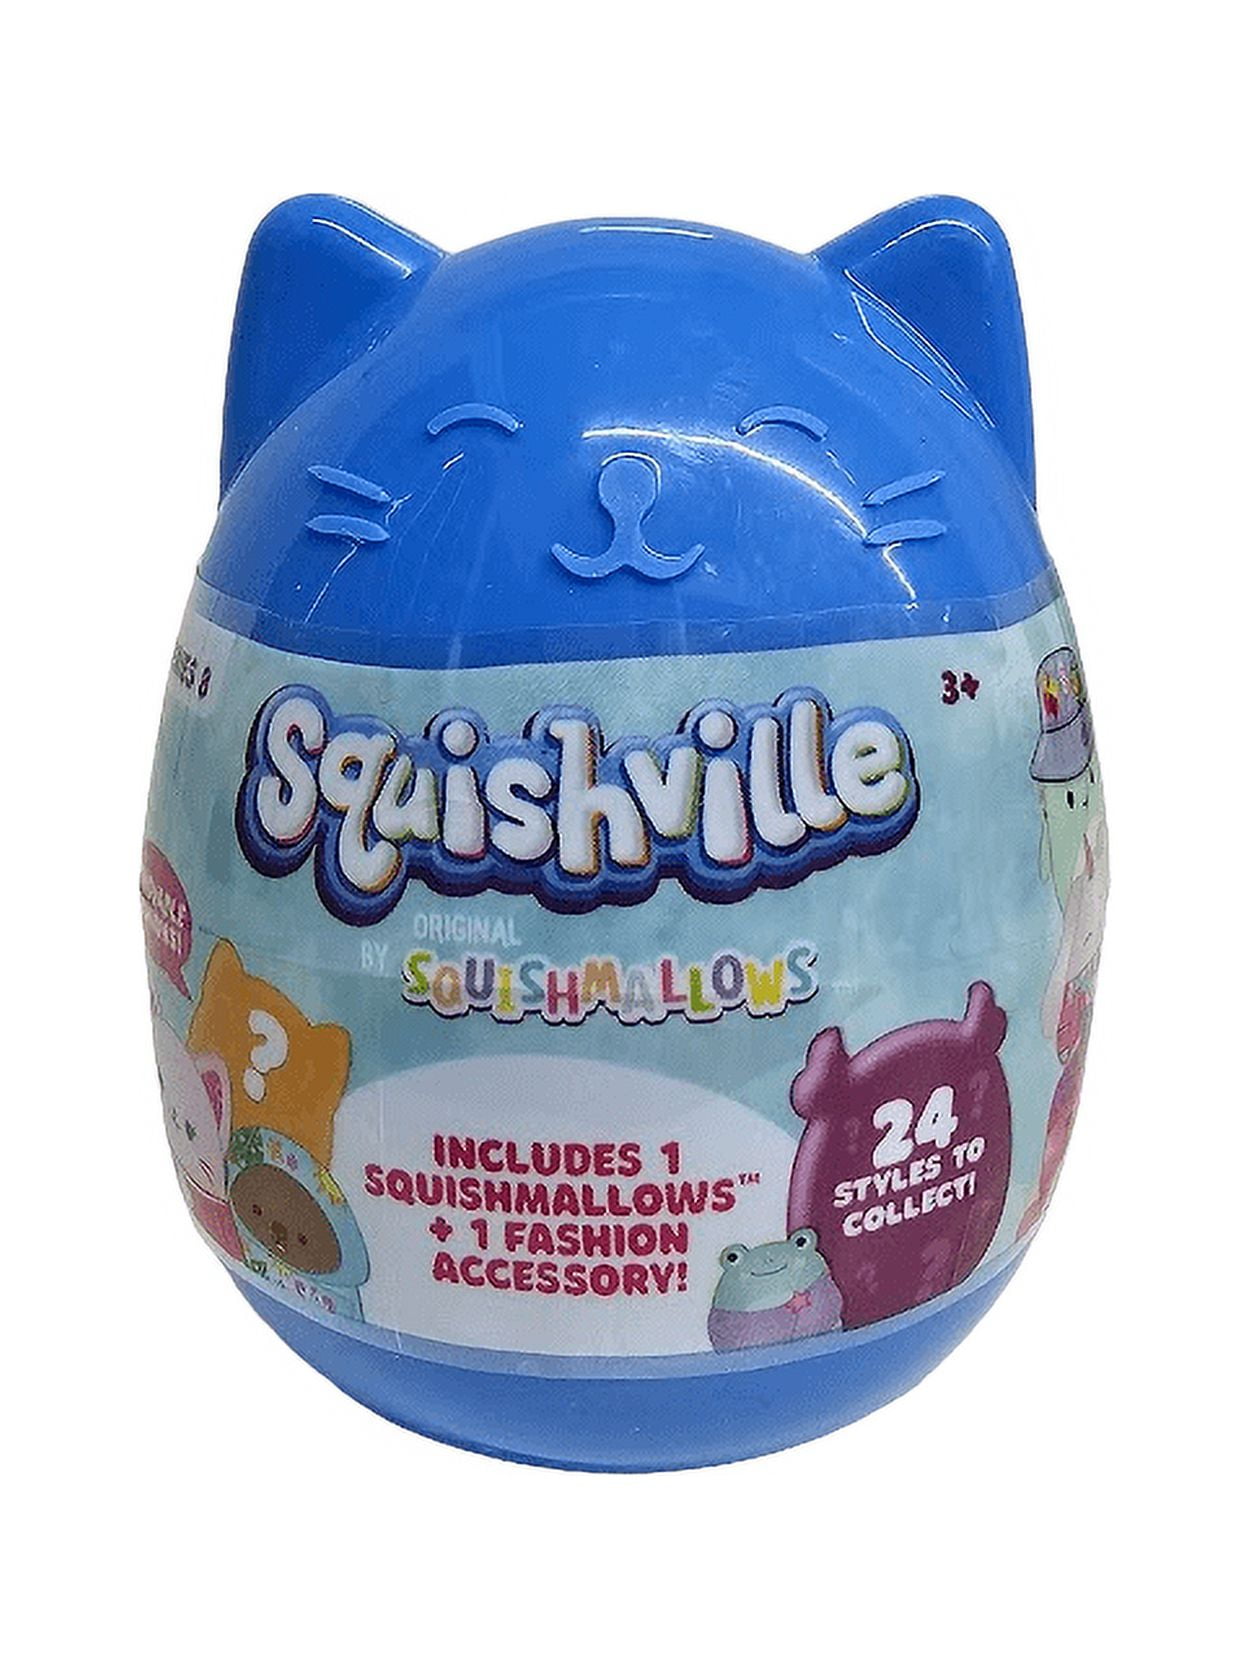 Squishville Series 8 Mystery Eggs Listing for ONLY BLUE Capsules Higher  Chance of Getting Caedyn!